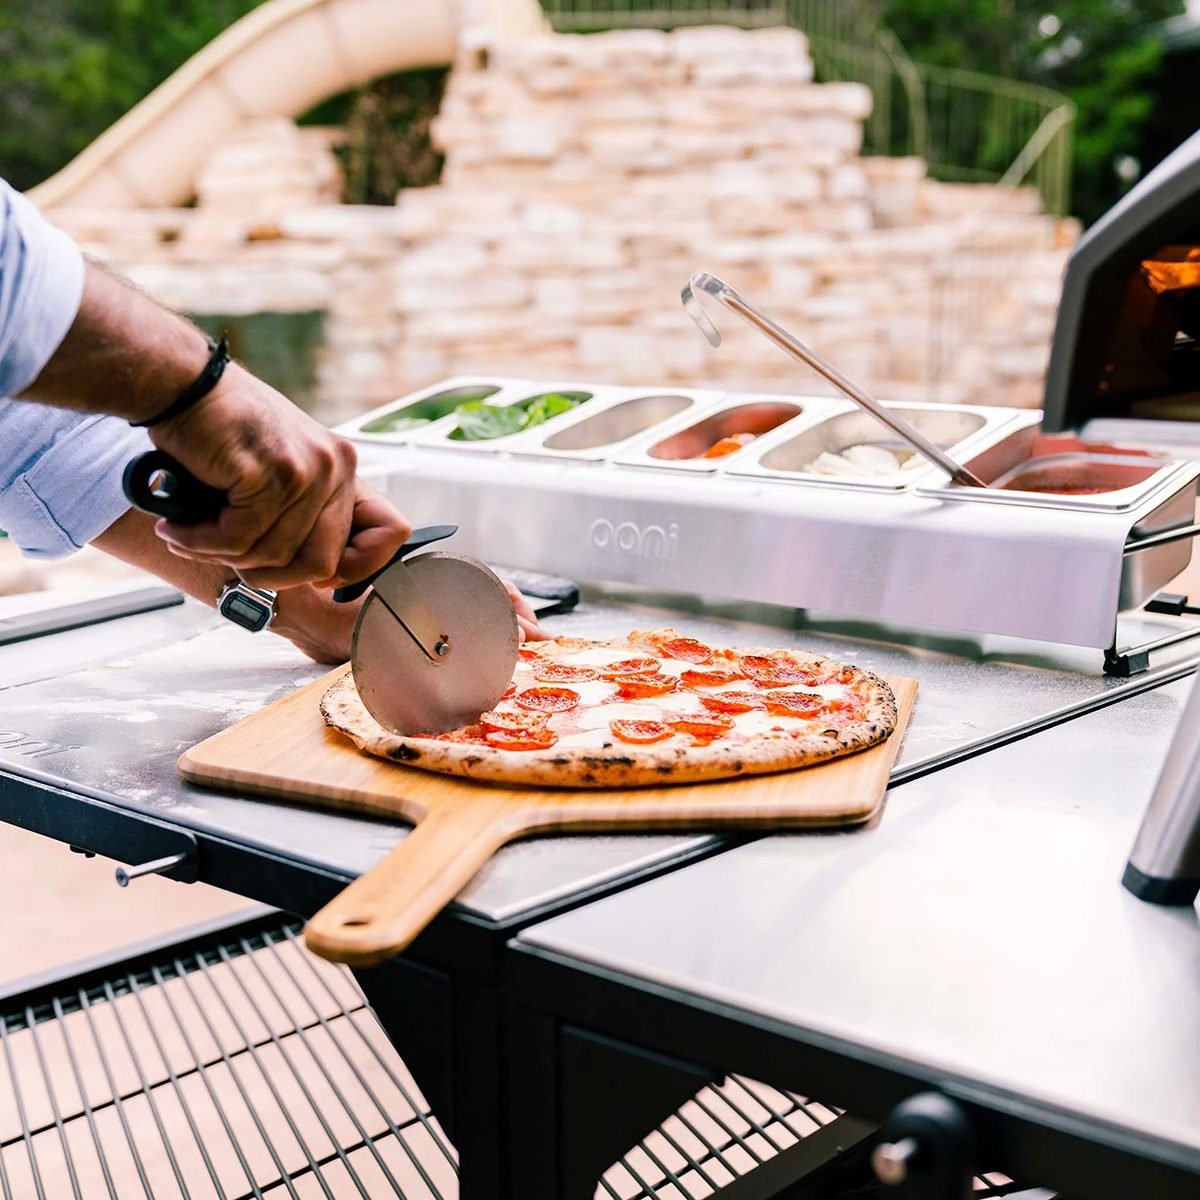 Ooni Pizza oven accessories explained 